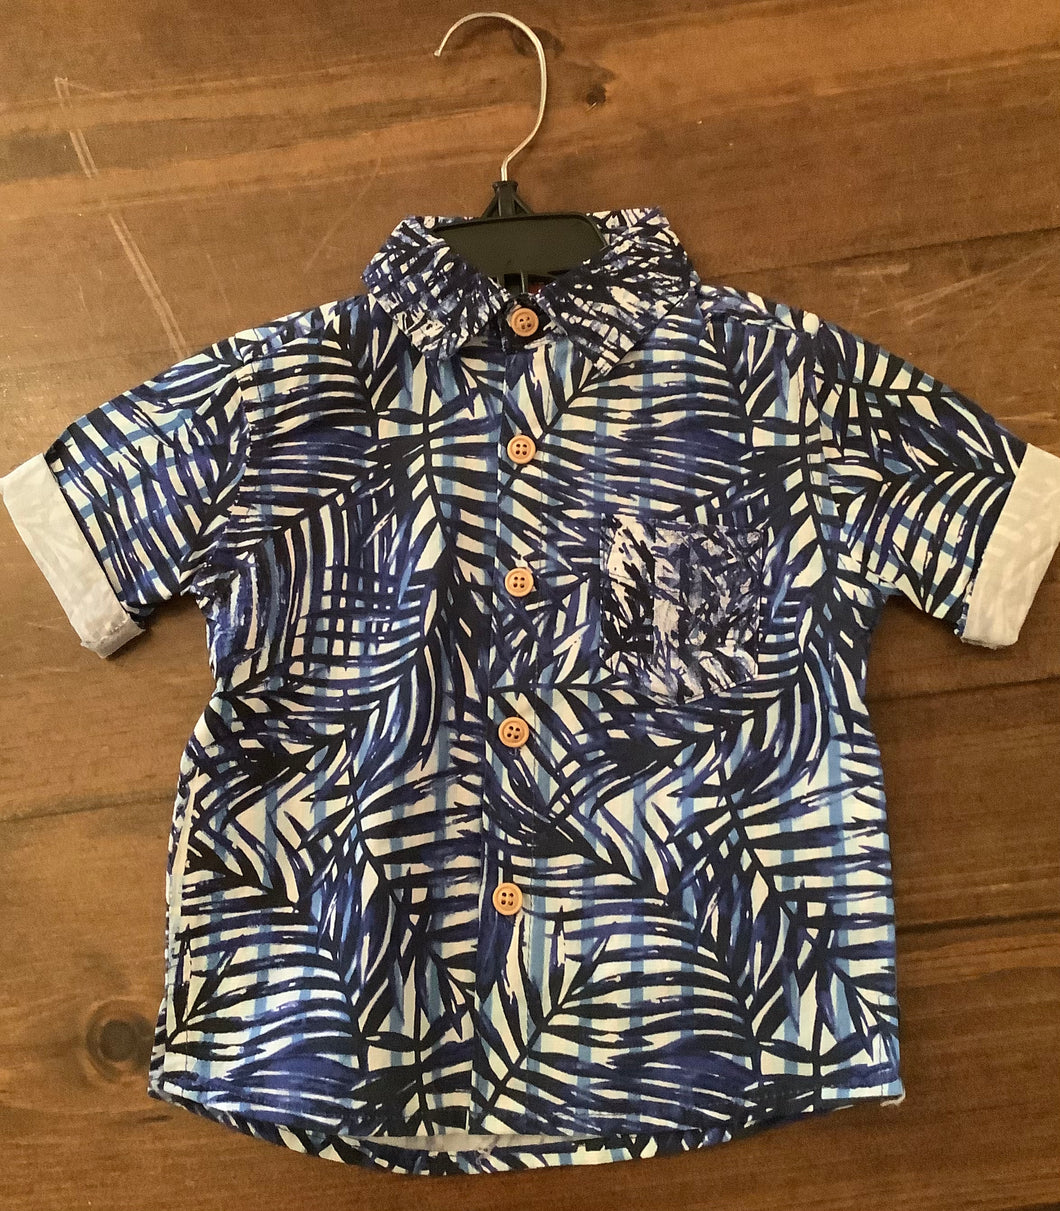 MID Boy’s Short Sleeved Blue Palm Leaves Hawaiian Style Shirt: Sizes 2/3 to 6/7